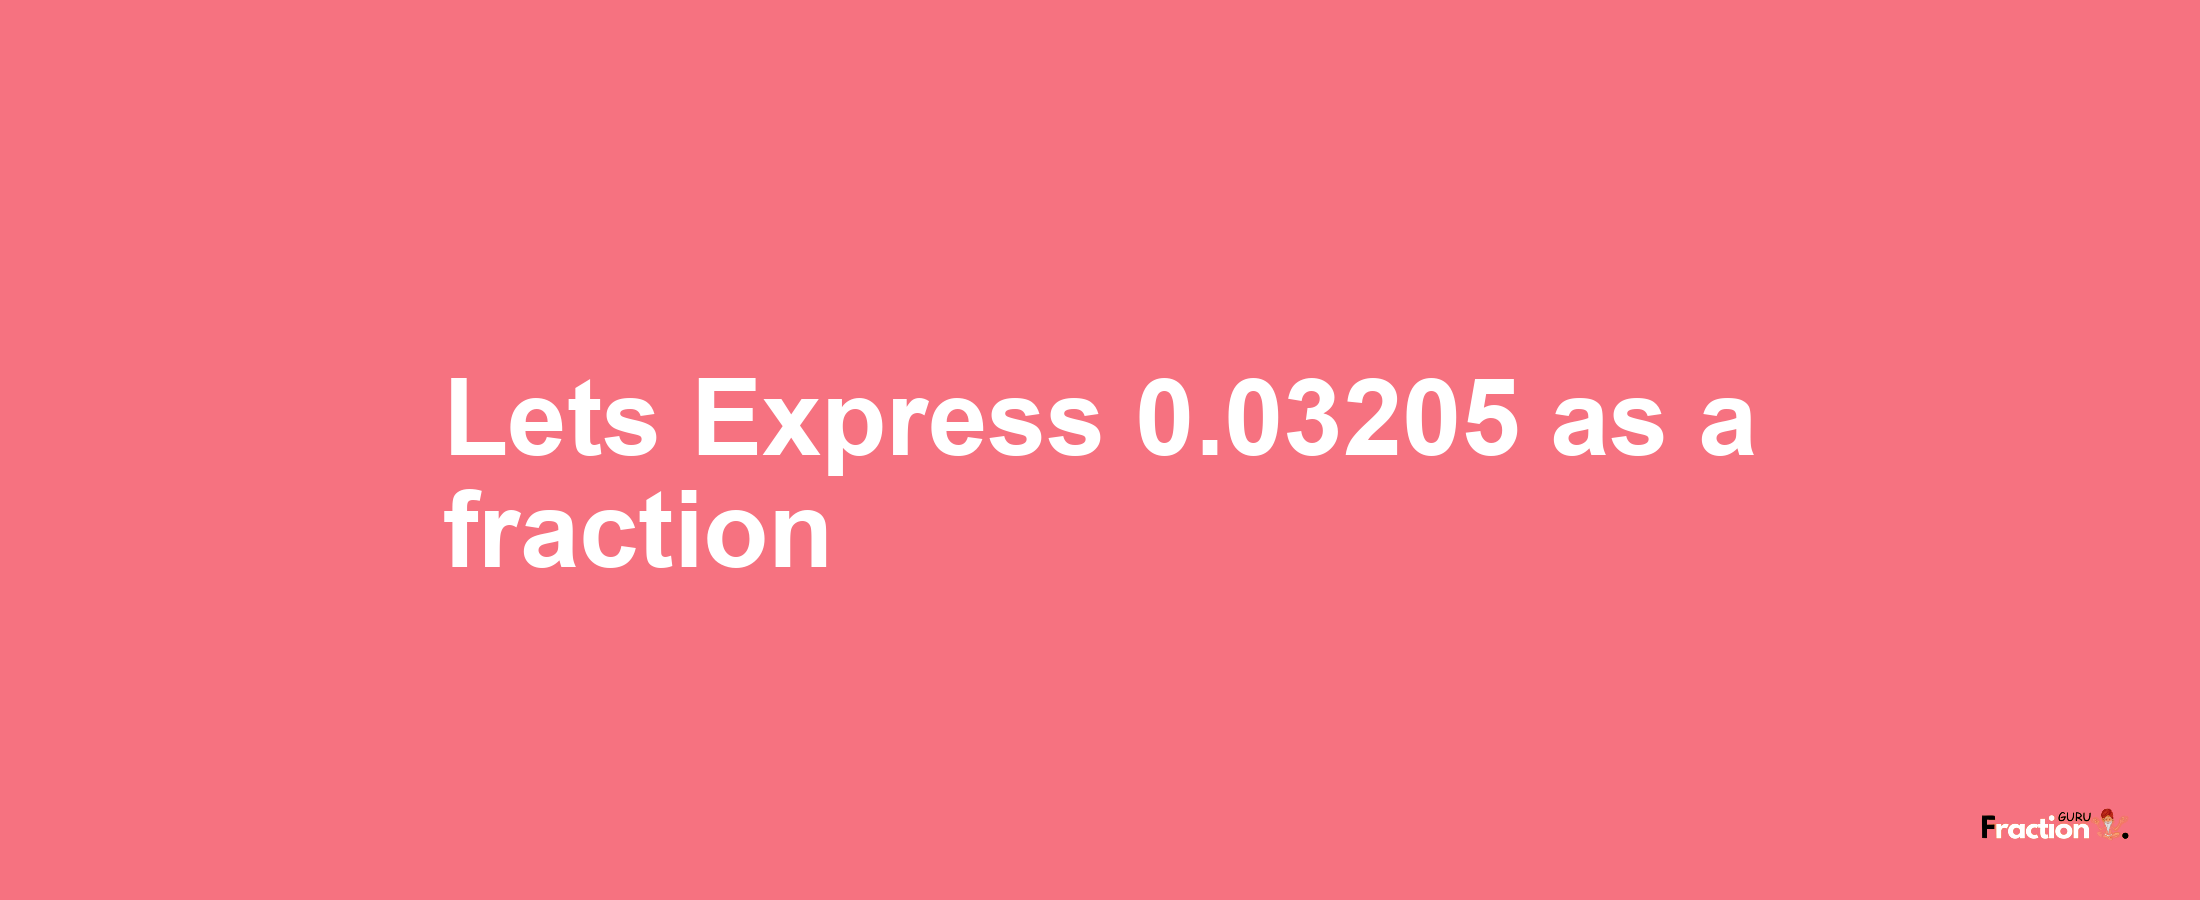 Lets Express 0.03205 as afraction